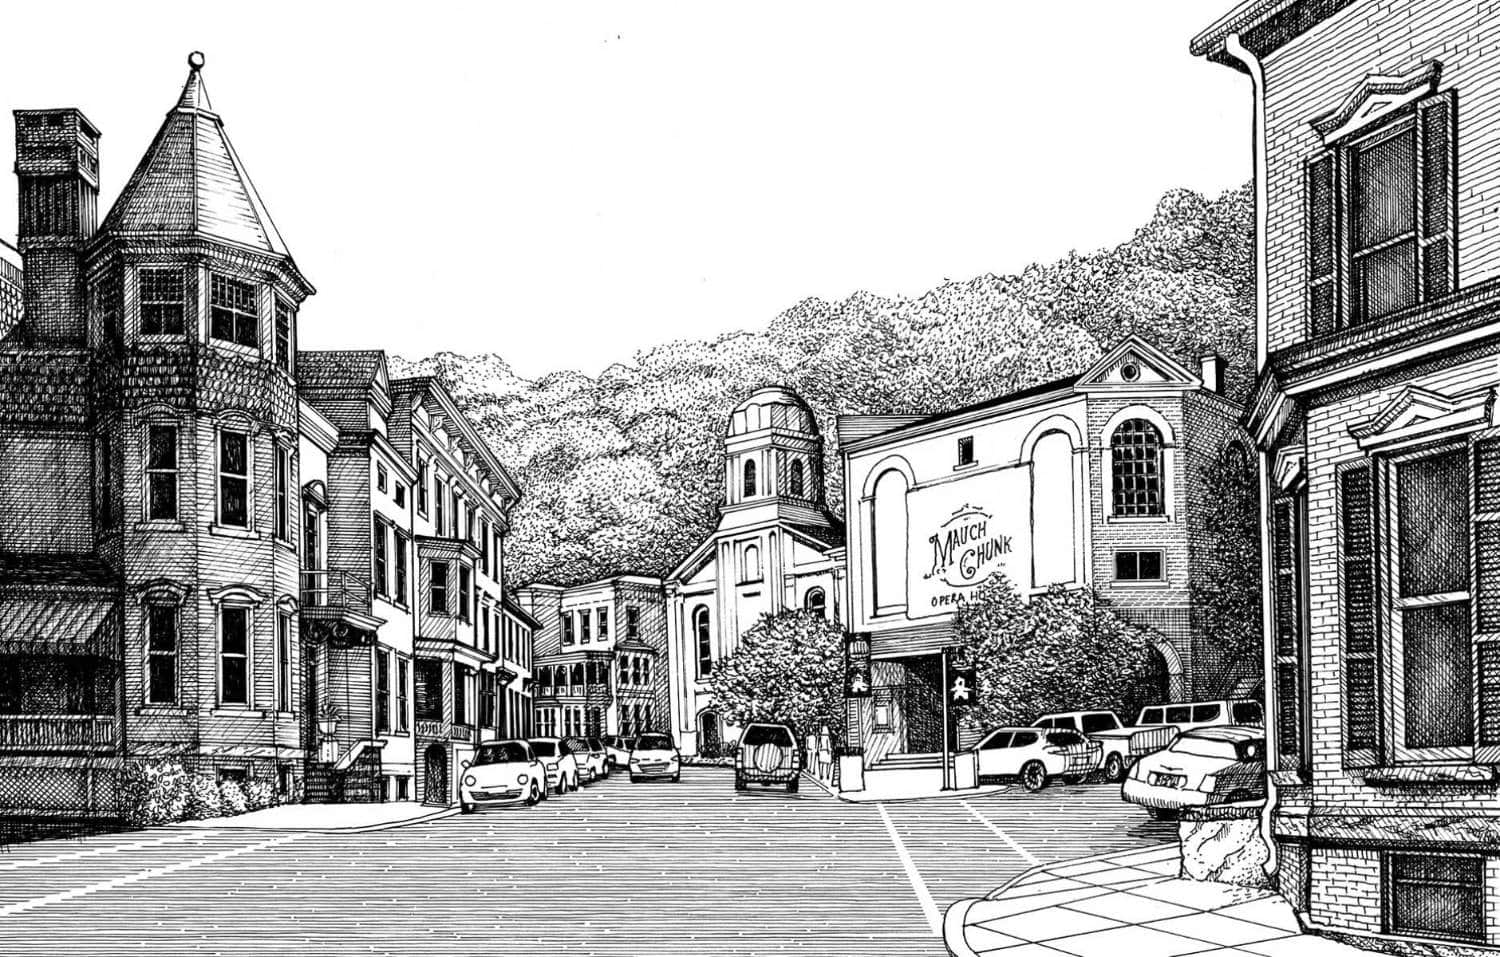 Jim Thorpe, Pennsylvania. The street deflects to reveal the Mauch Chunk Opera House, originally a 900-seat concert hall refurbished in 2003 to hold 400 patrons. Pen & ink drawing by Dhiru Thadani.